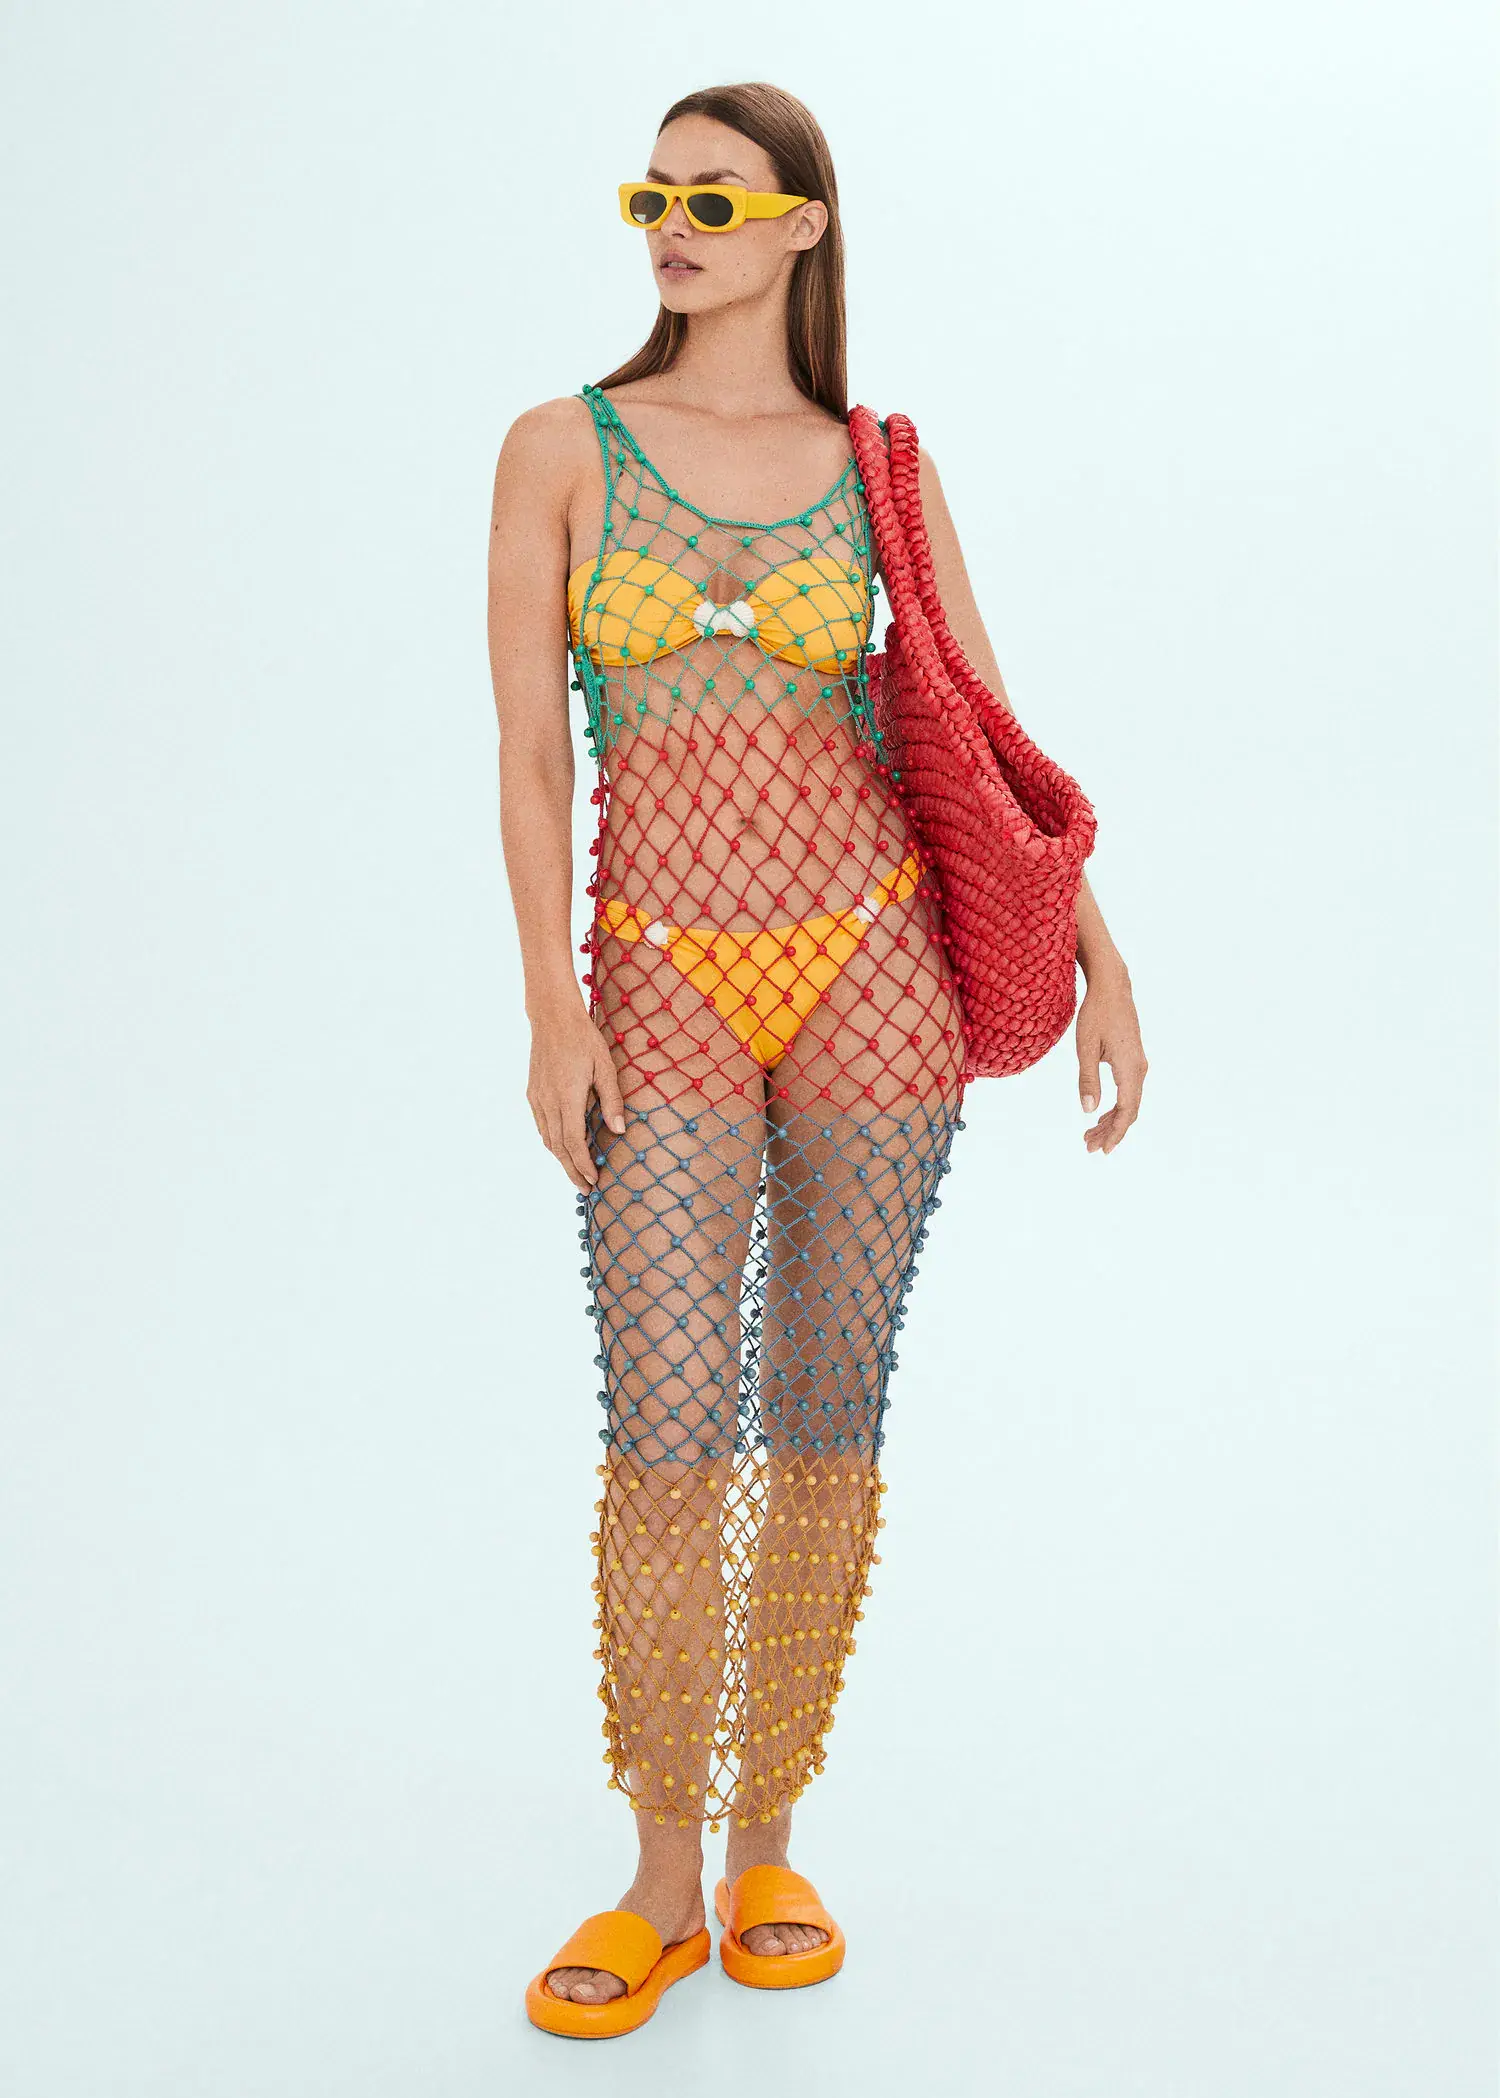 Mango Multi-coloured net dress with beads. a woman in a colorful bikini and fishnet suit. 